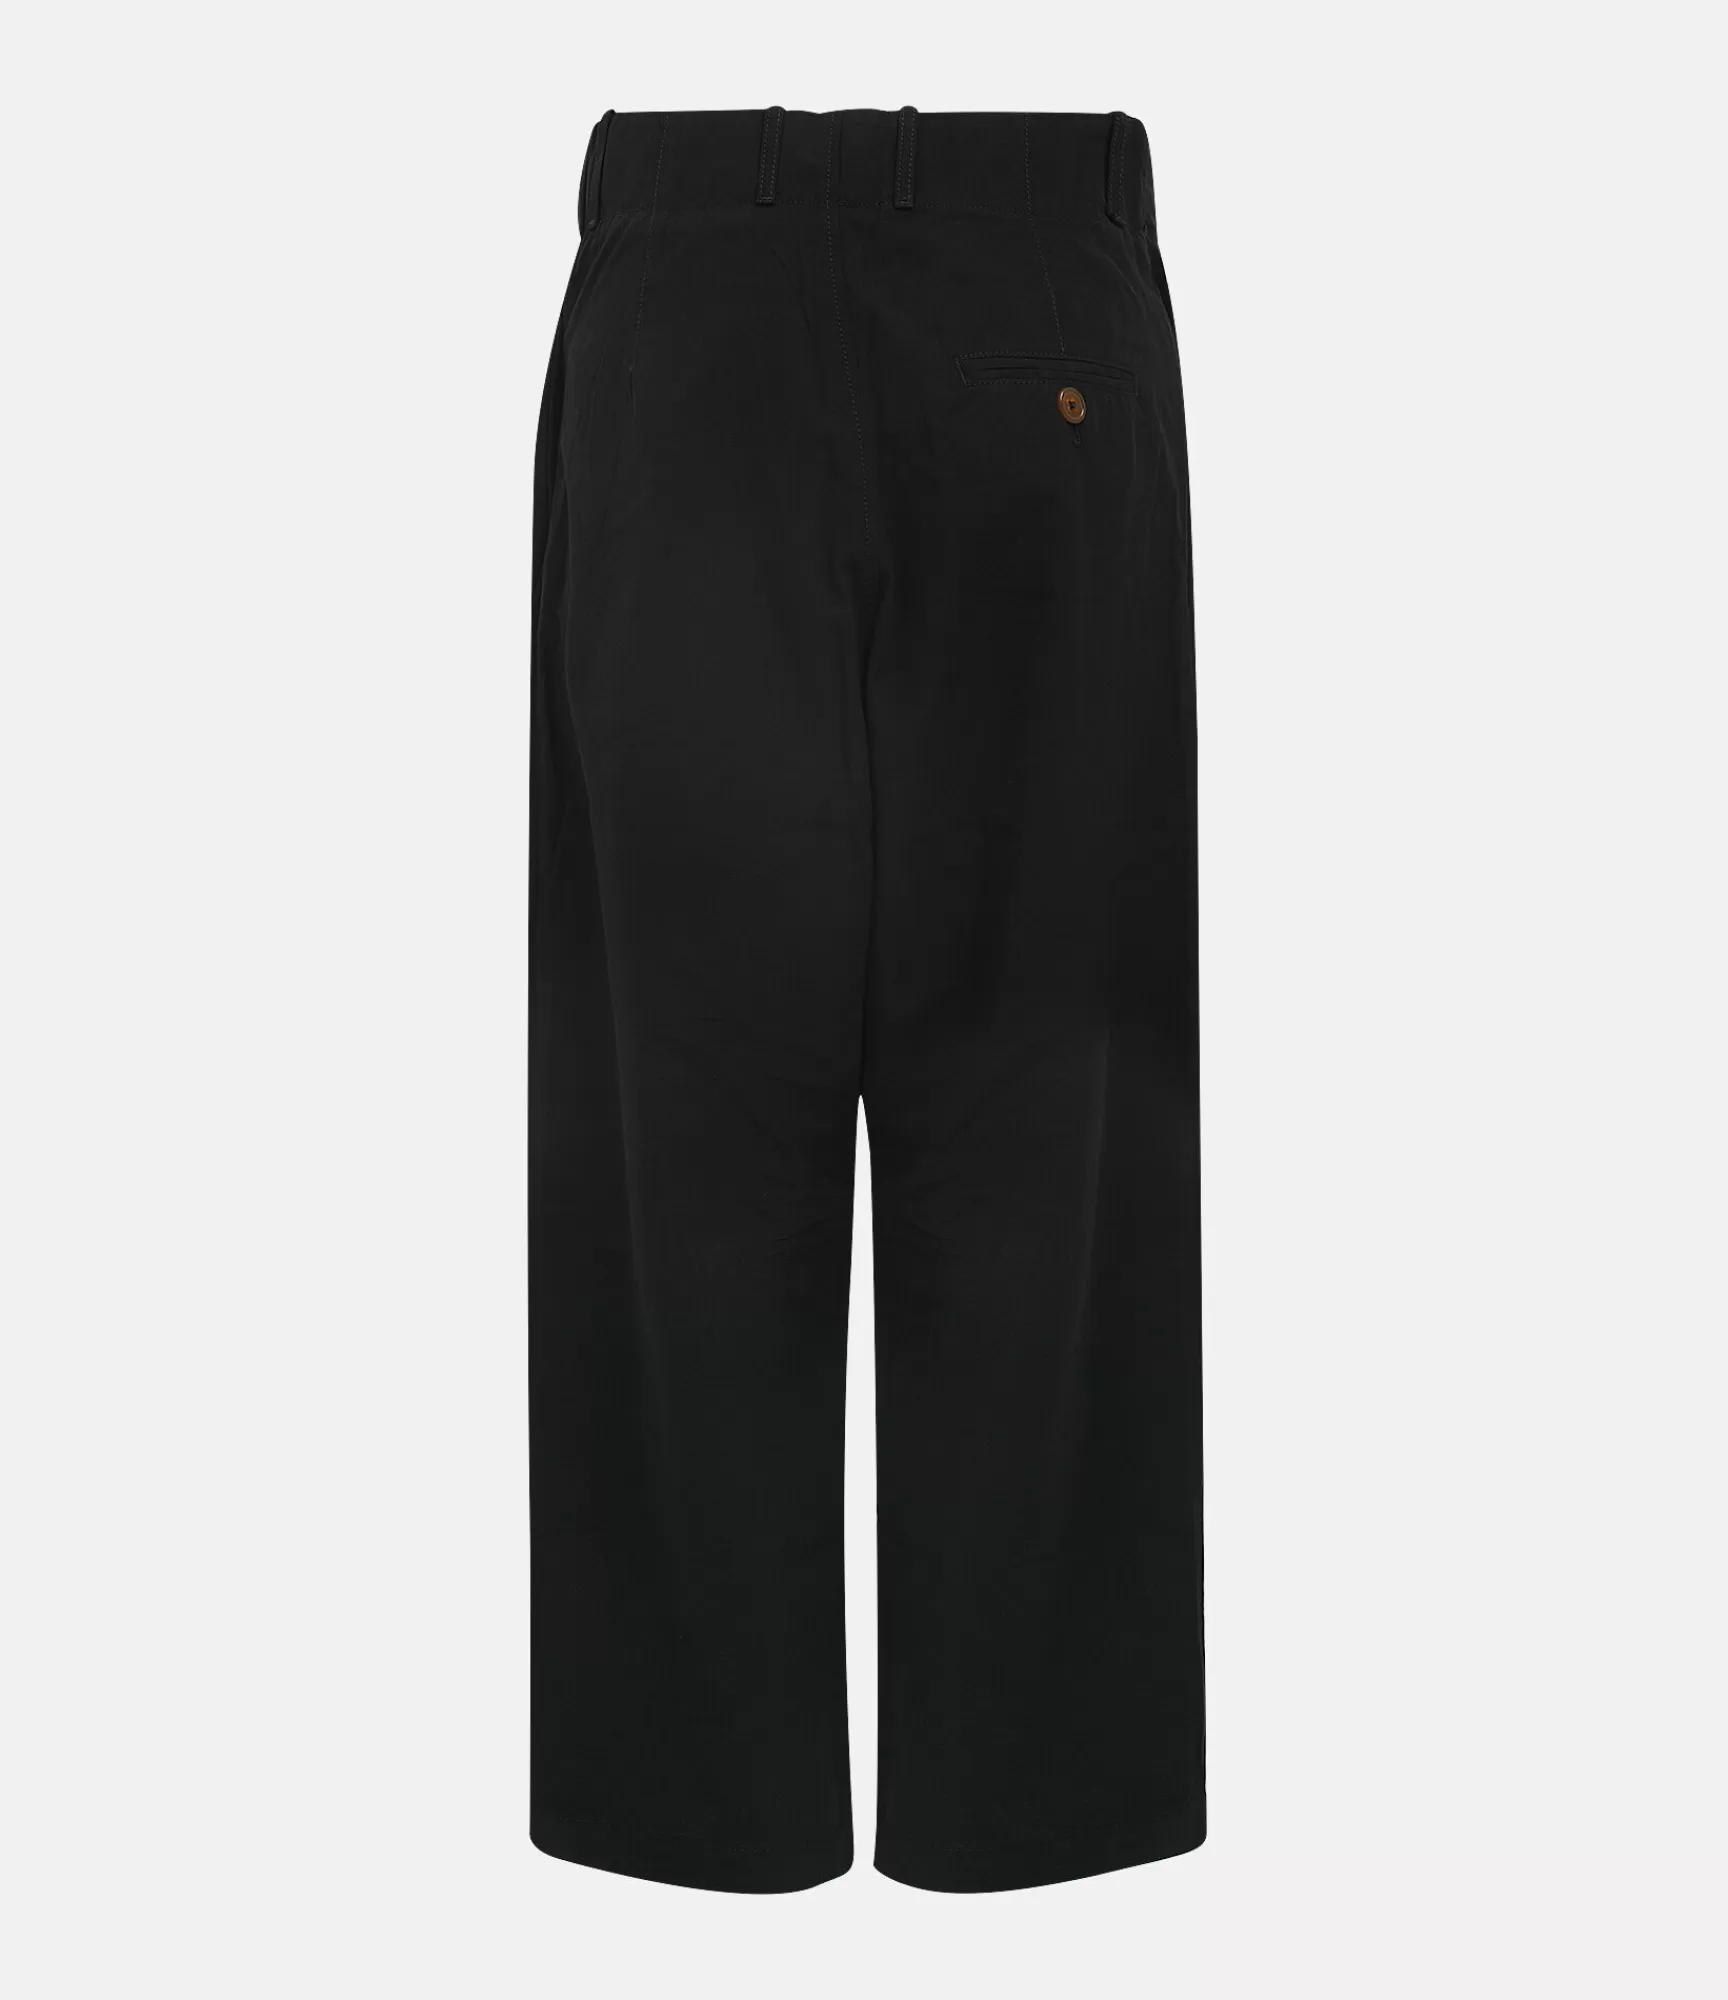 Vivienne Westwood Trousers and Shorts*Alien trousers Black